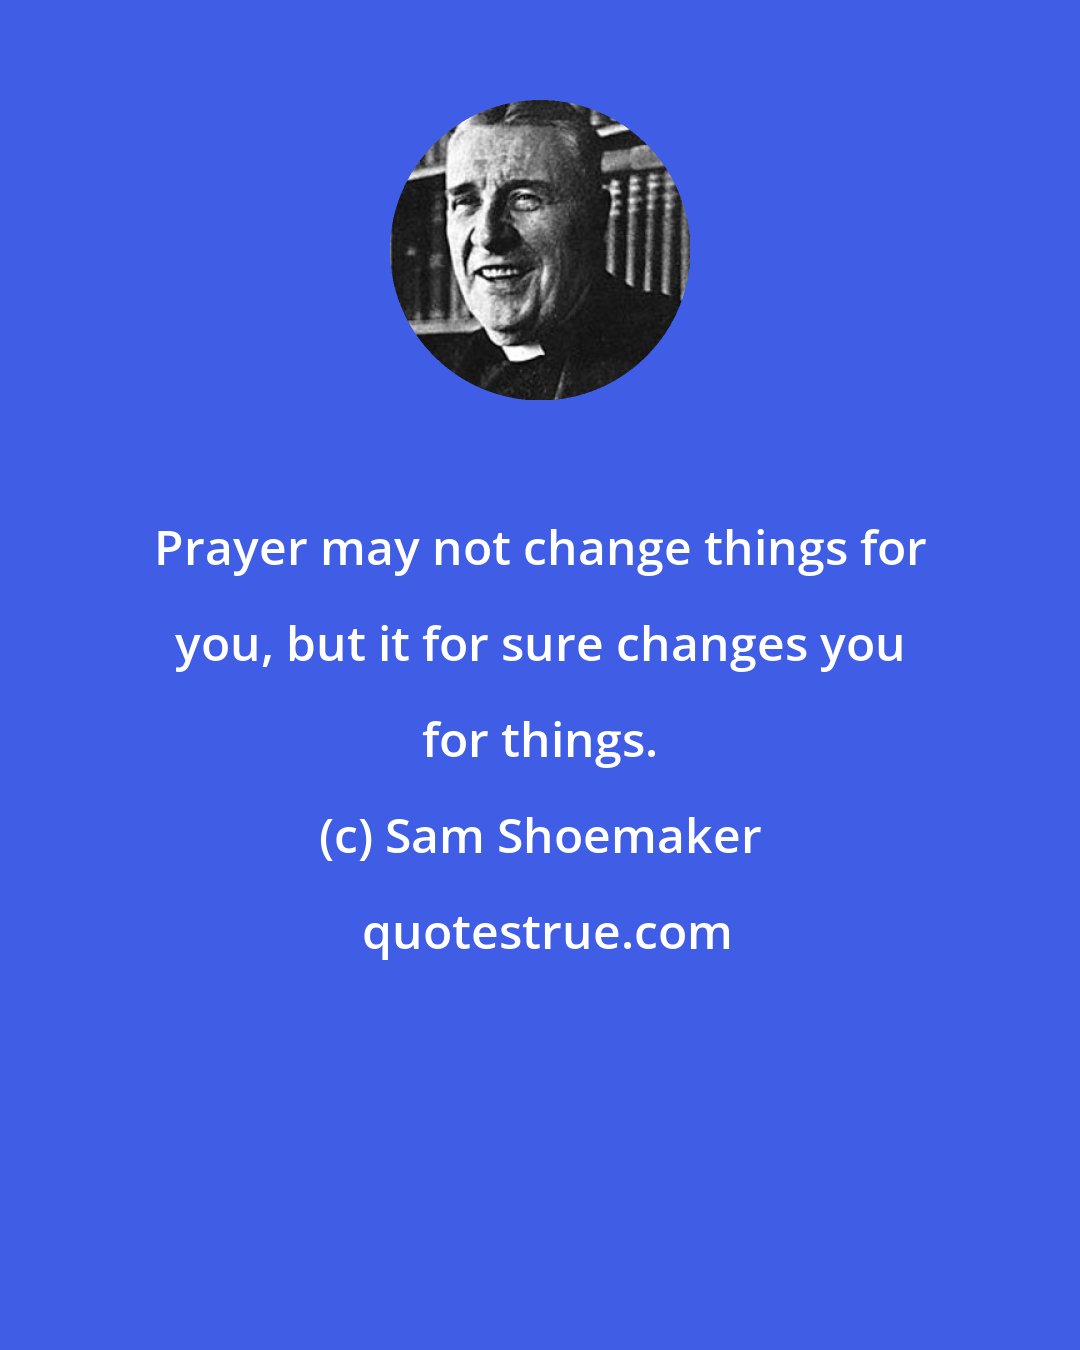 Sam Shoemaker: Prayer may not change things for you, but it for sure changes you for things.